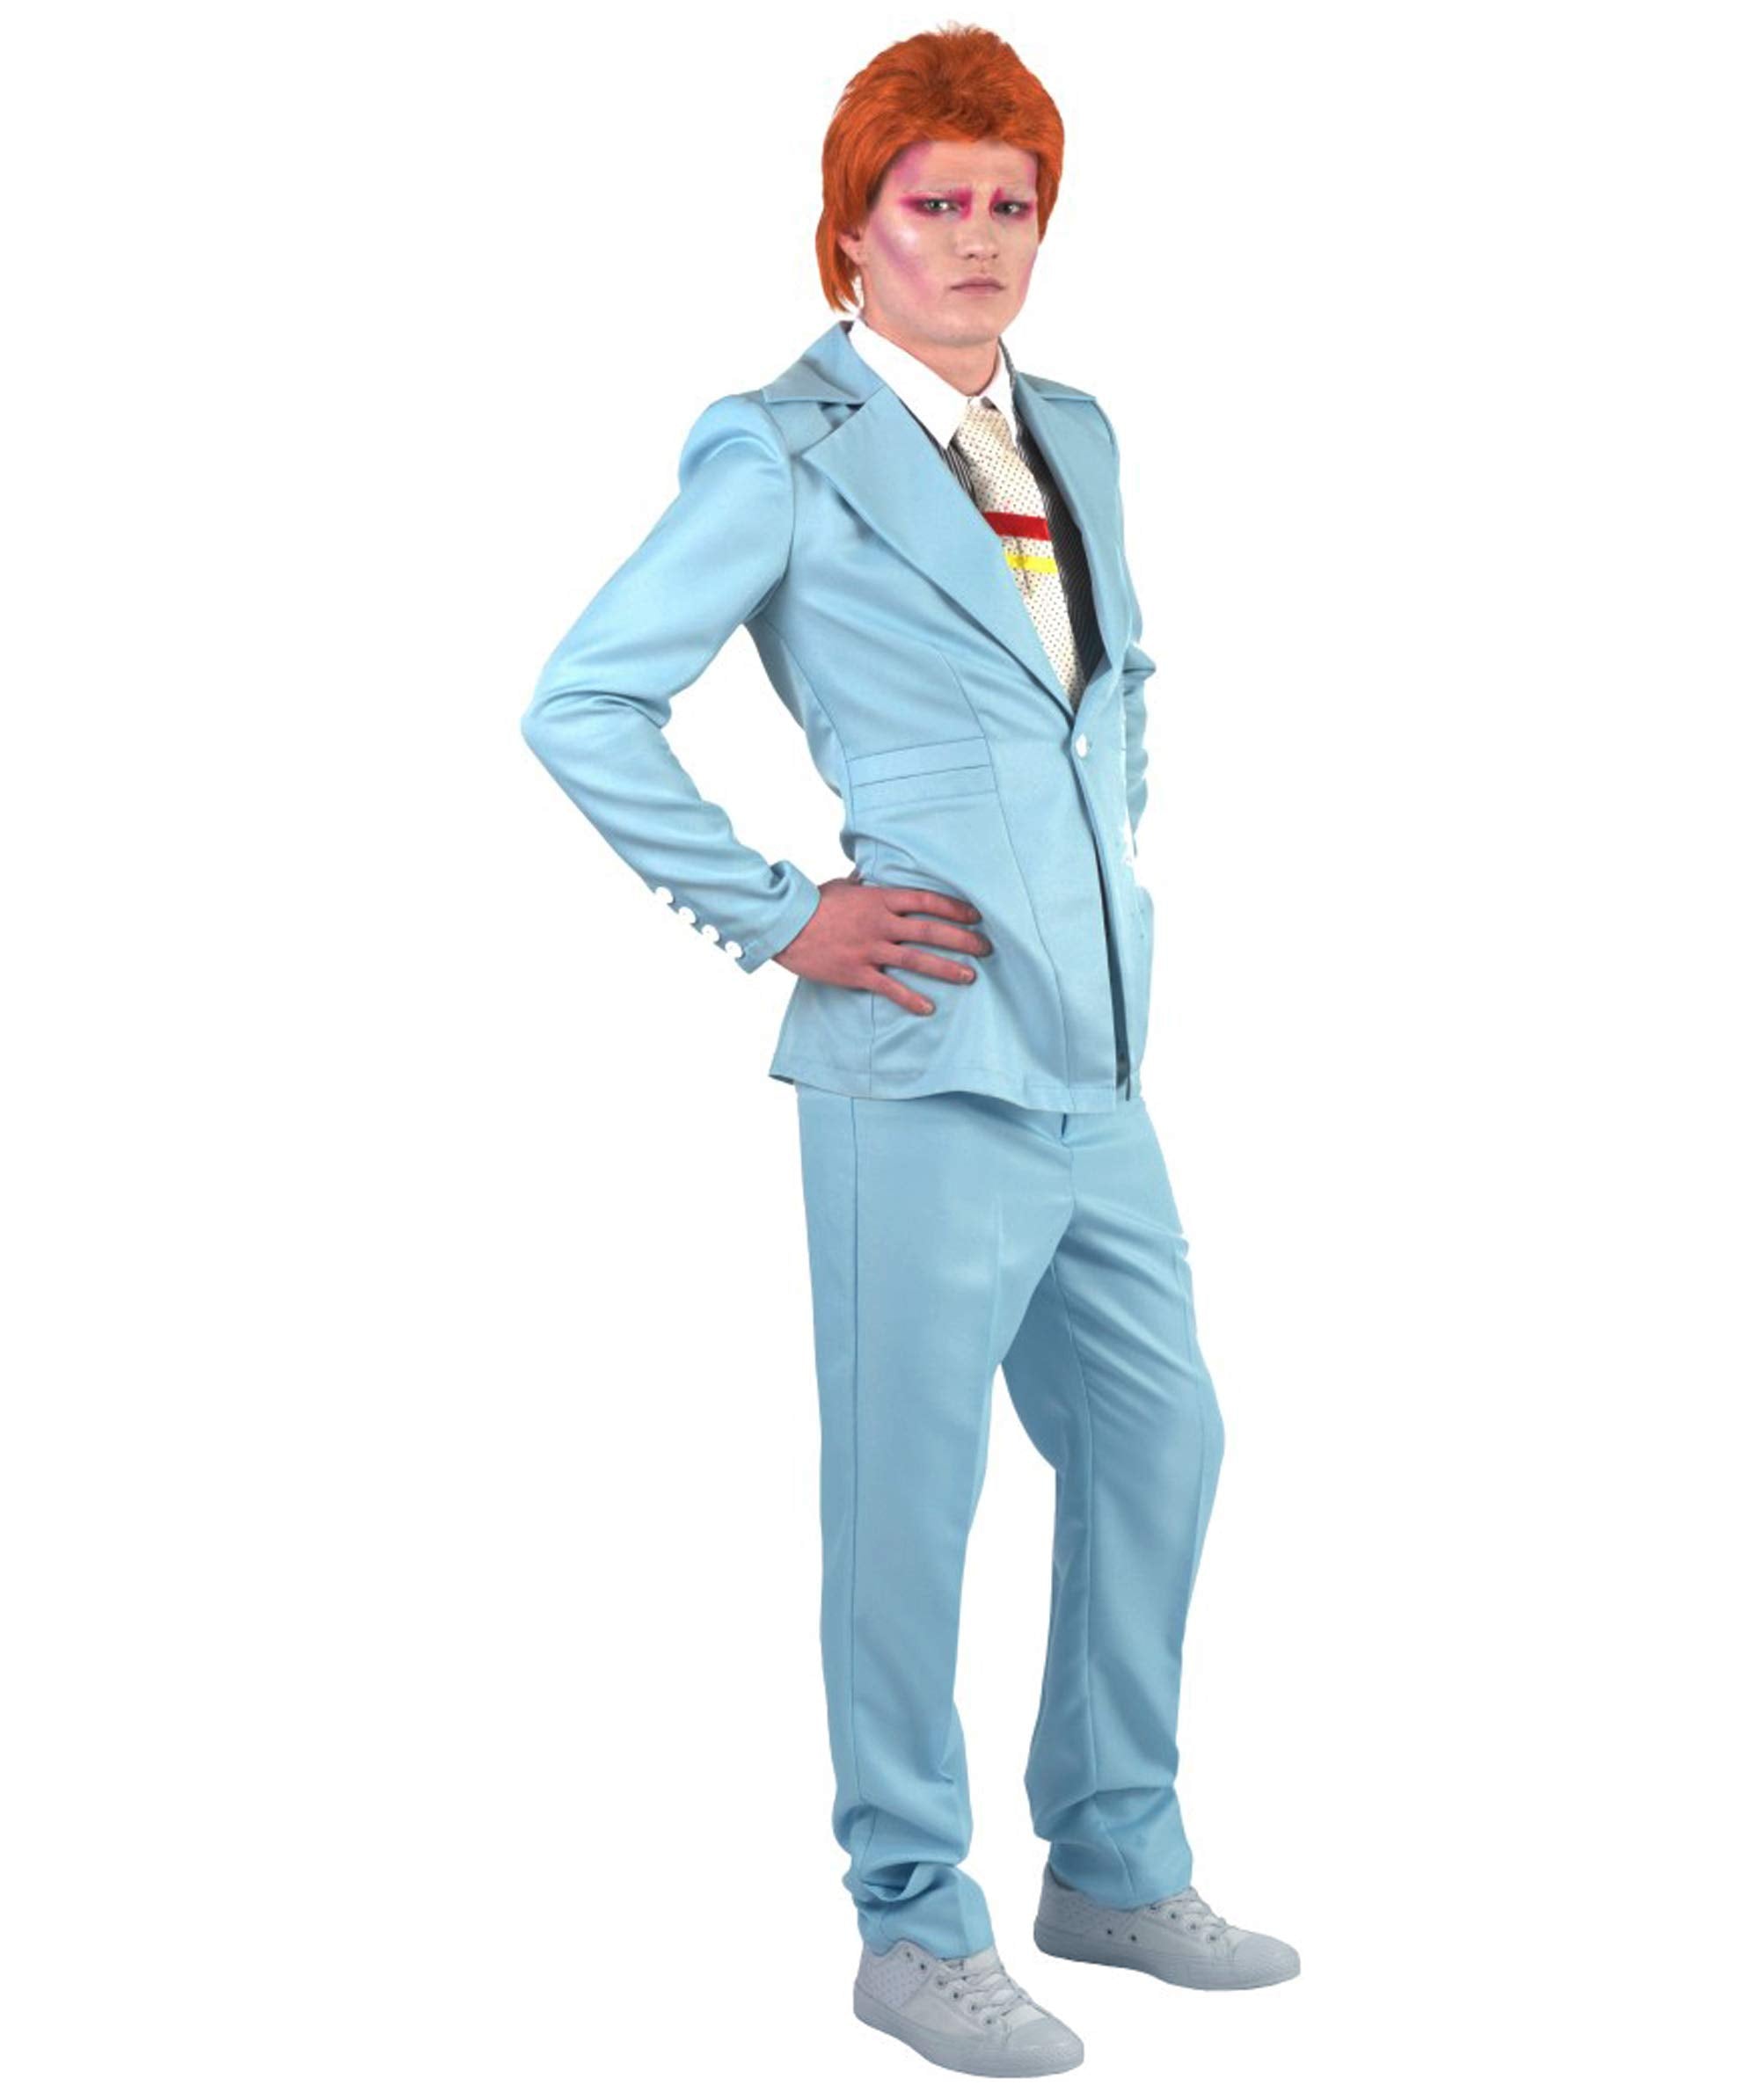 70's Rock Star Suit Costume with Dickie and Tie | Premium Halloween Costume  | Multiple Color Options